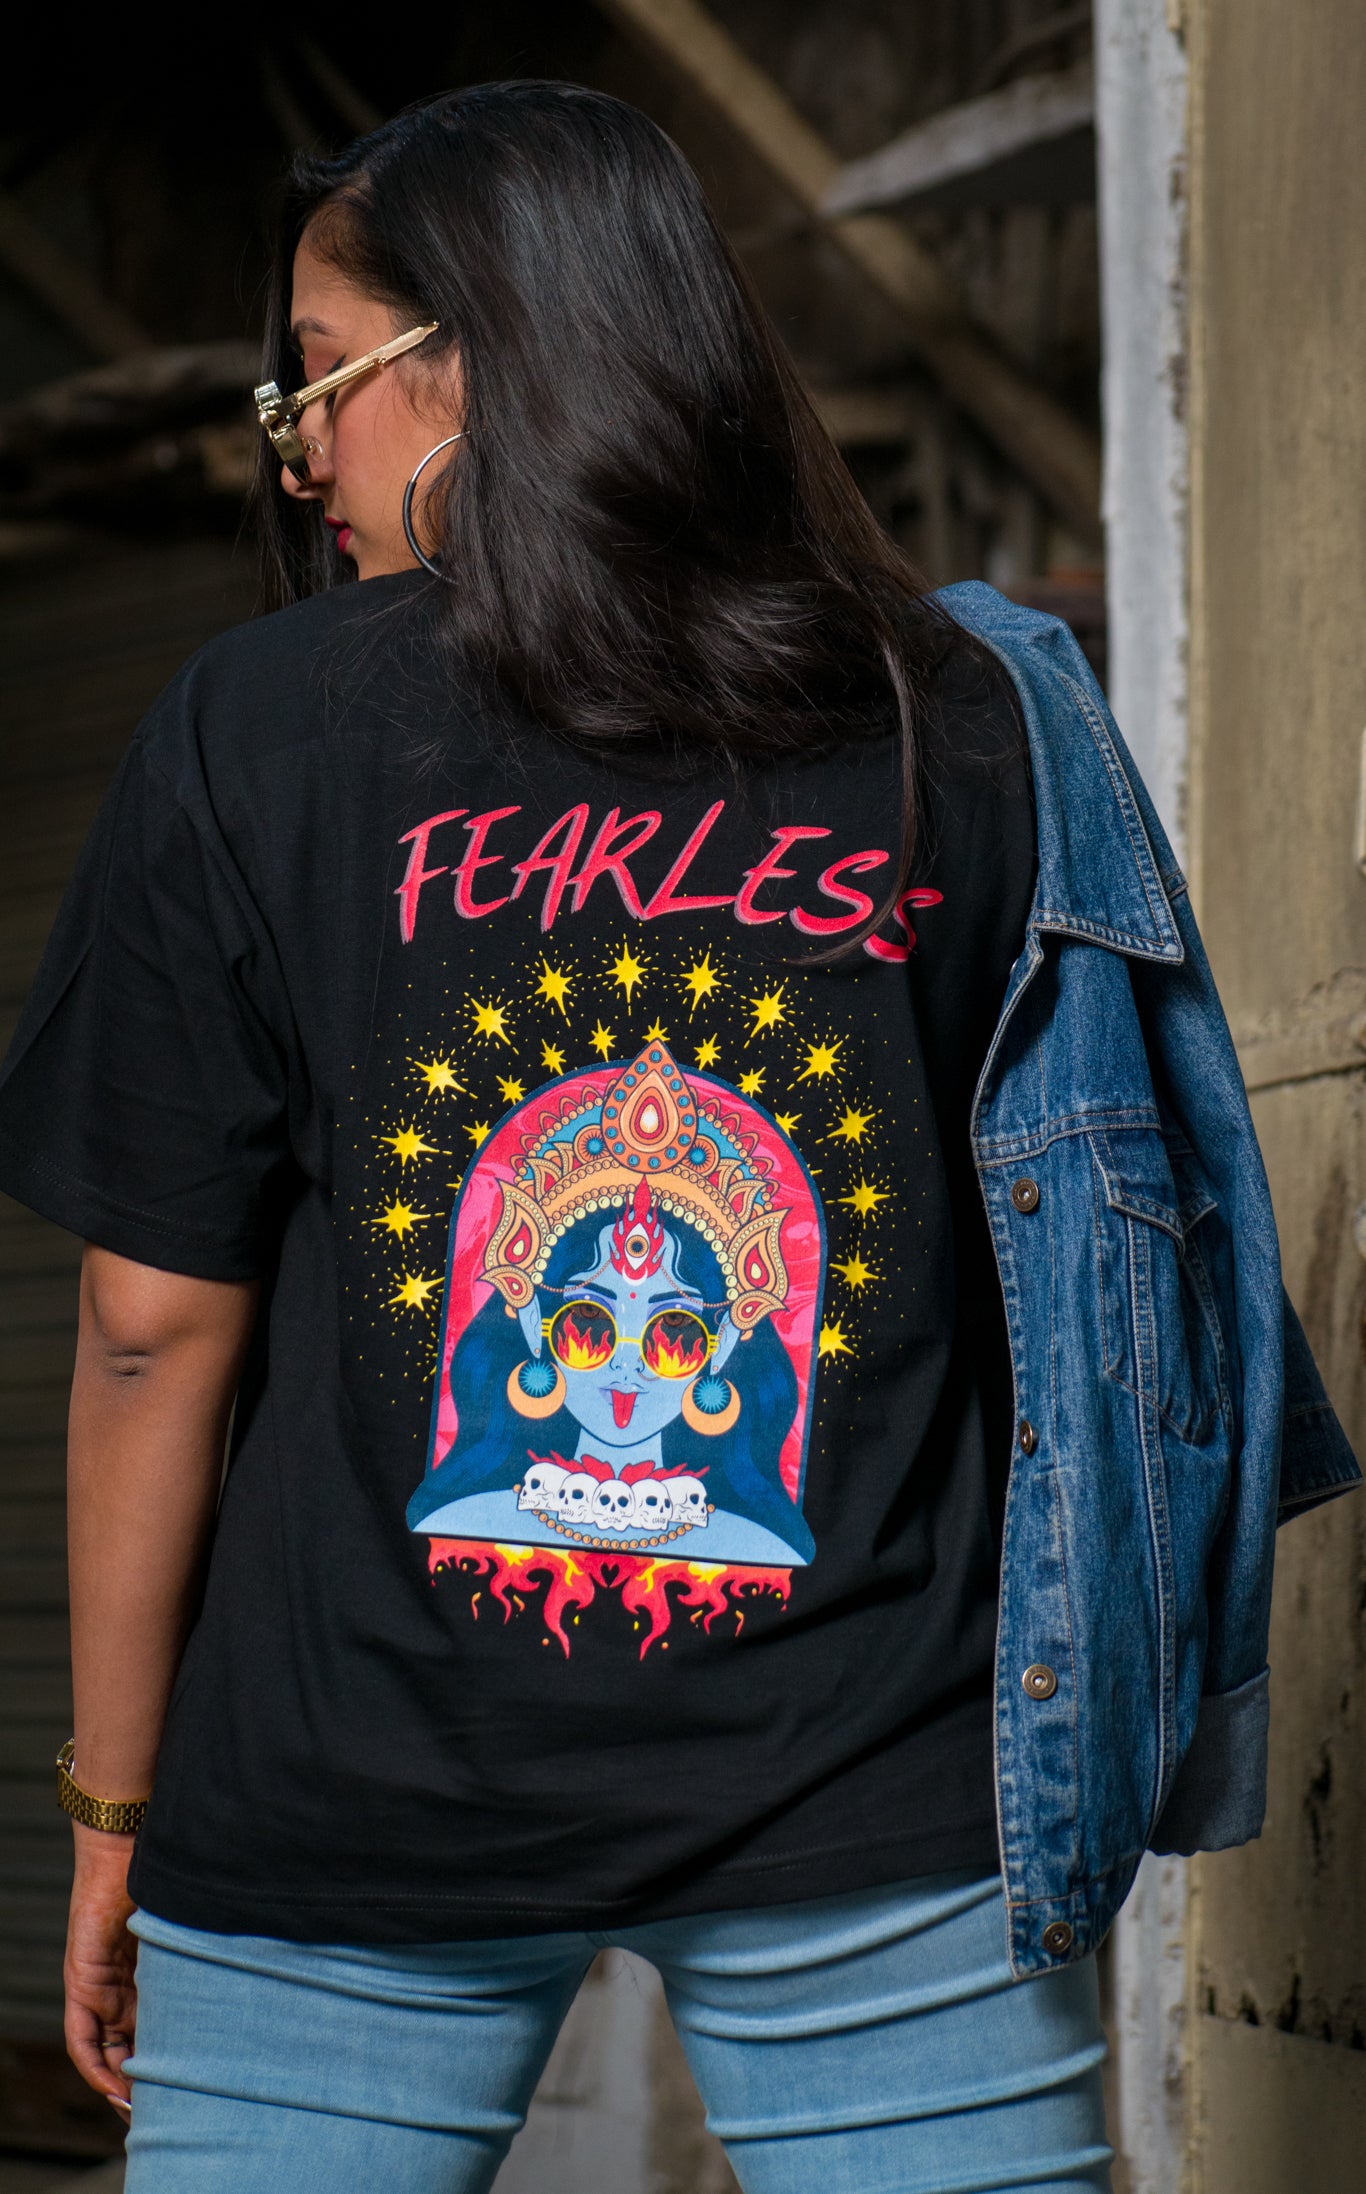 FEARLESS Unisex Black Over-sized Tshirt